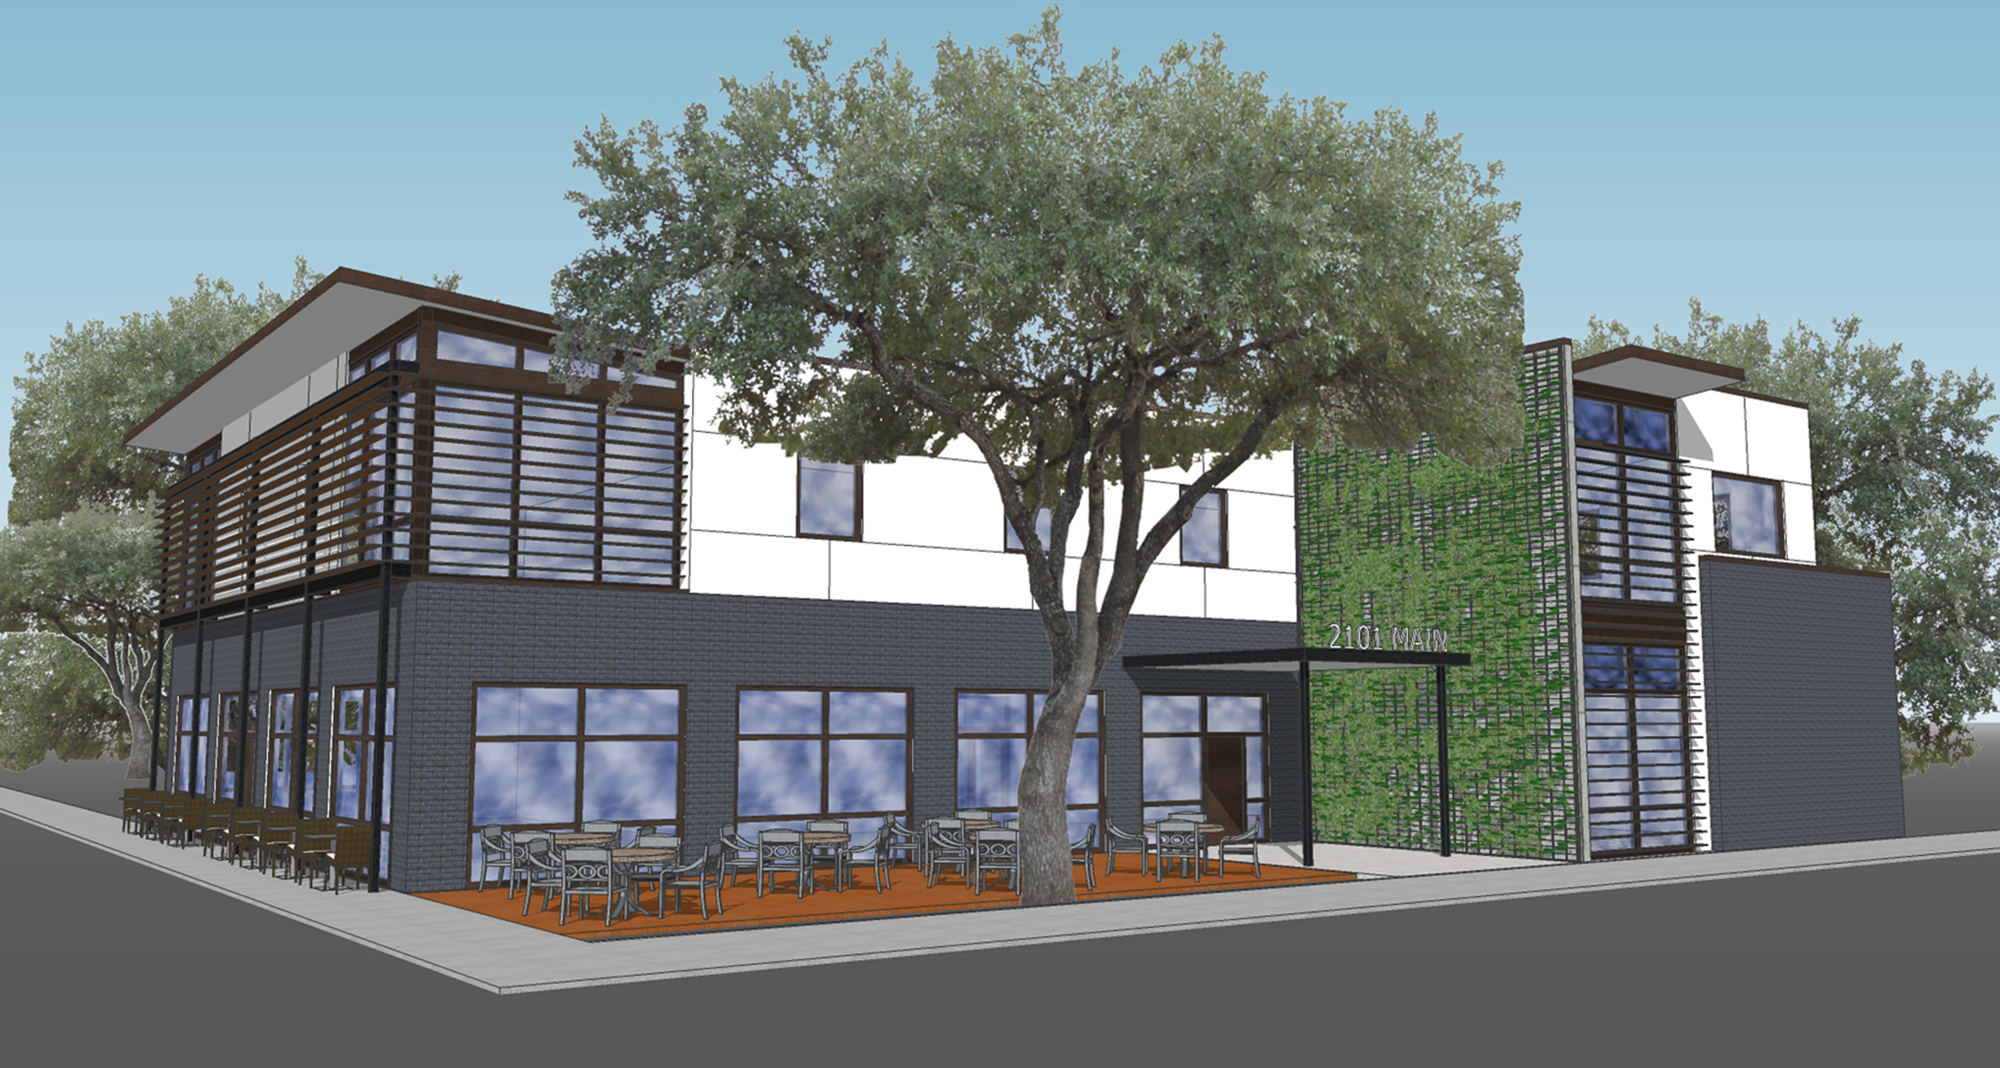 The Schimberg Group is preparing to begin construction on a two-story restaurant and office space at 2101 Main St.